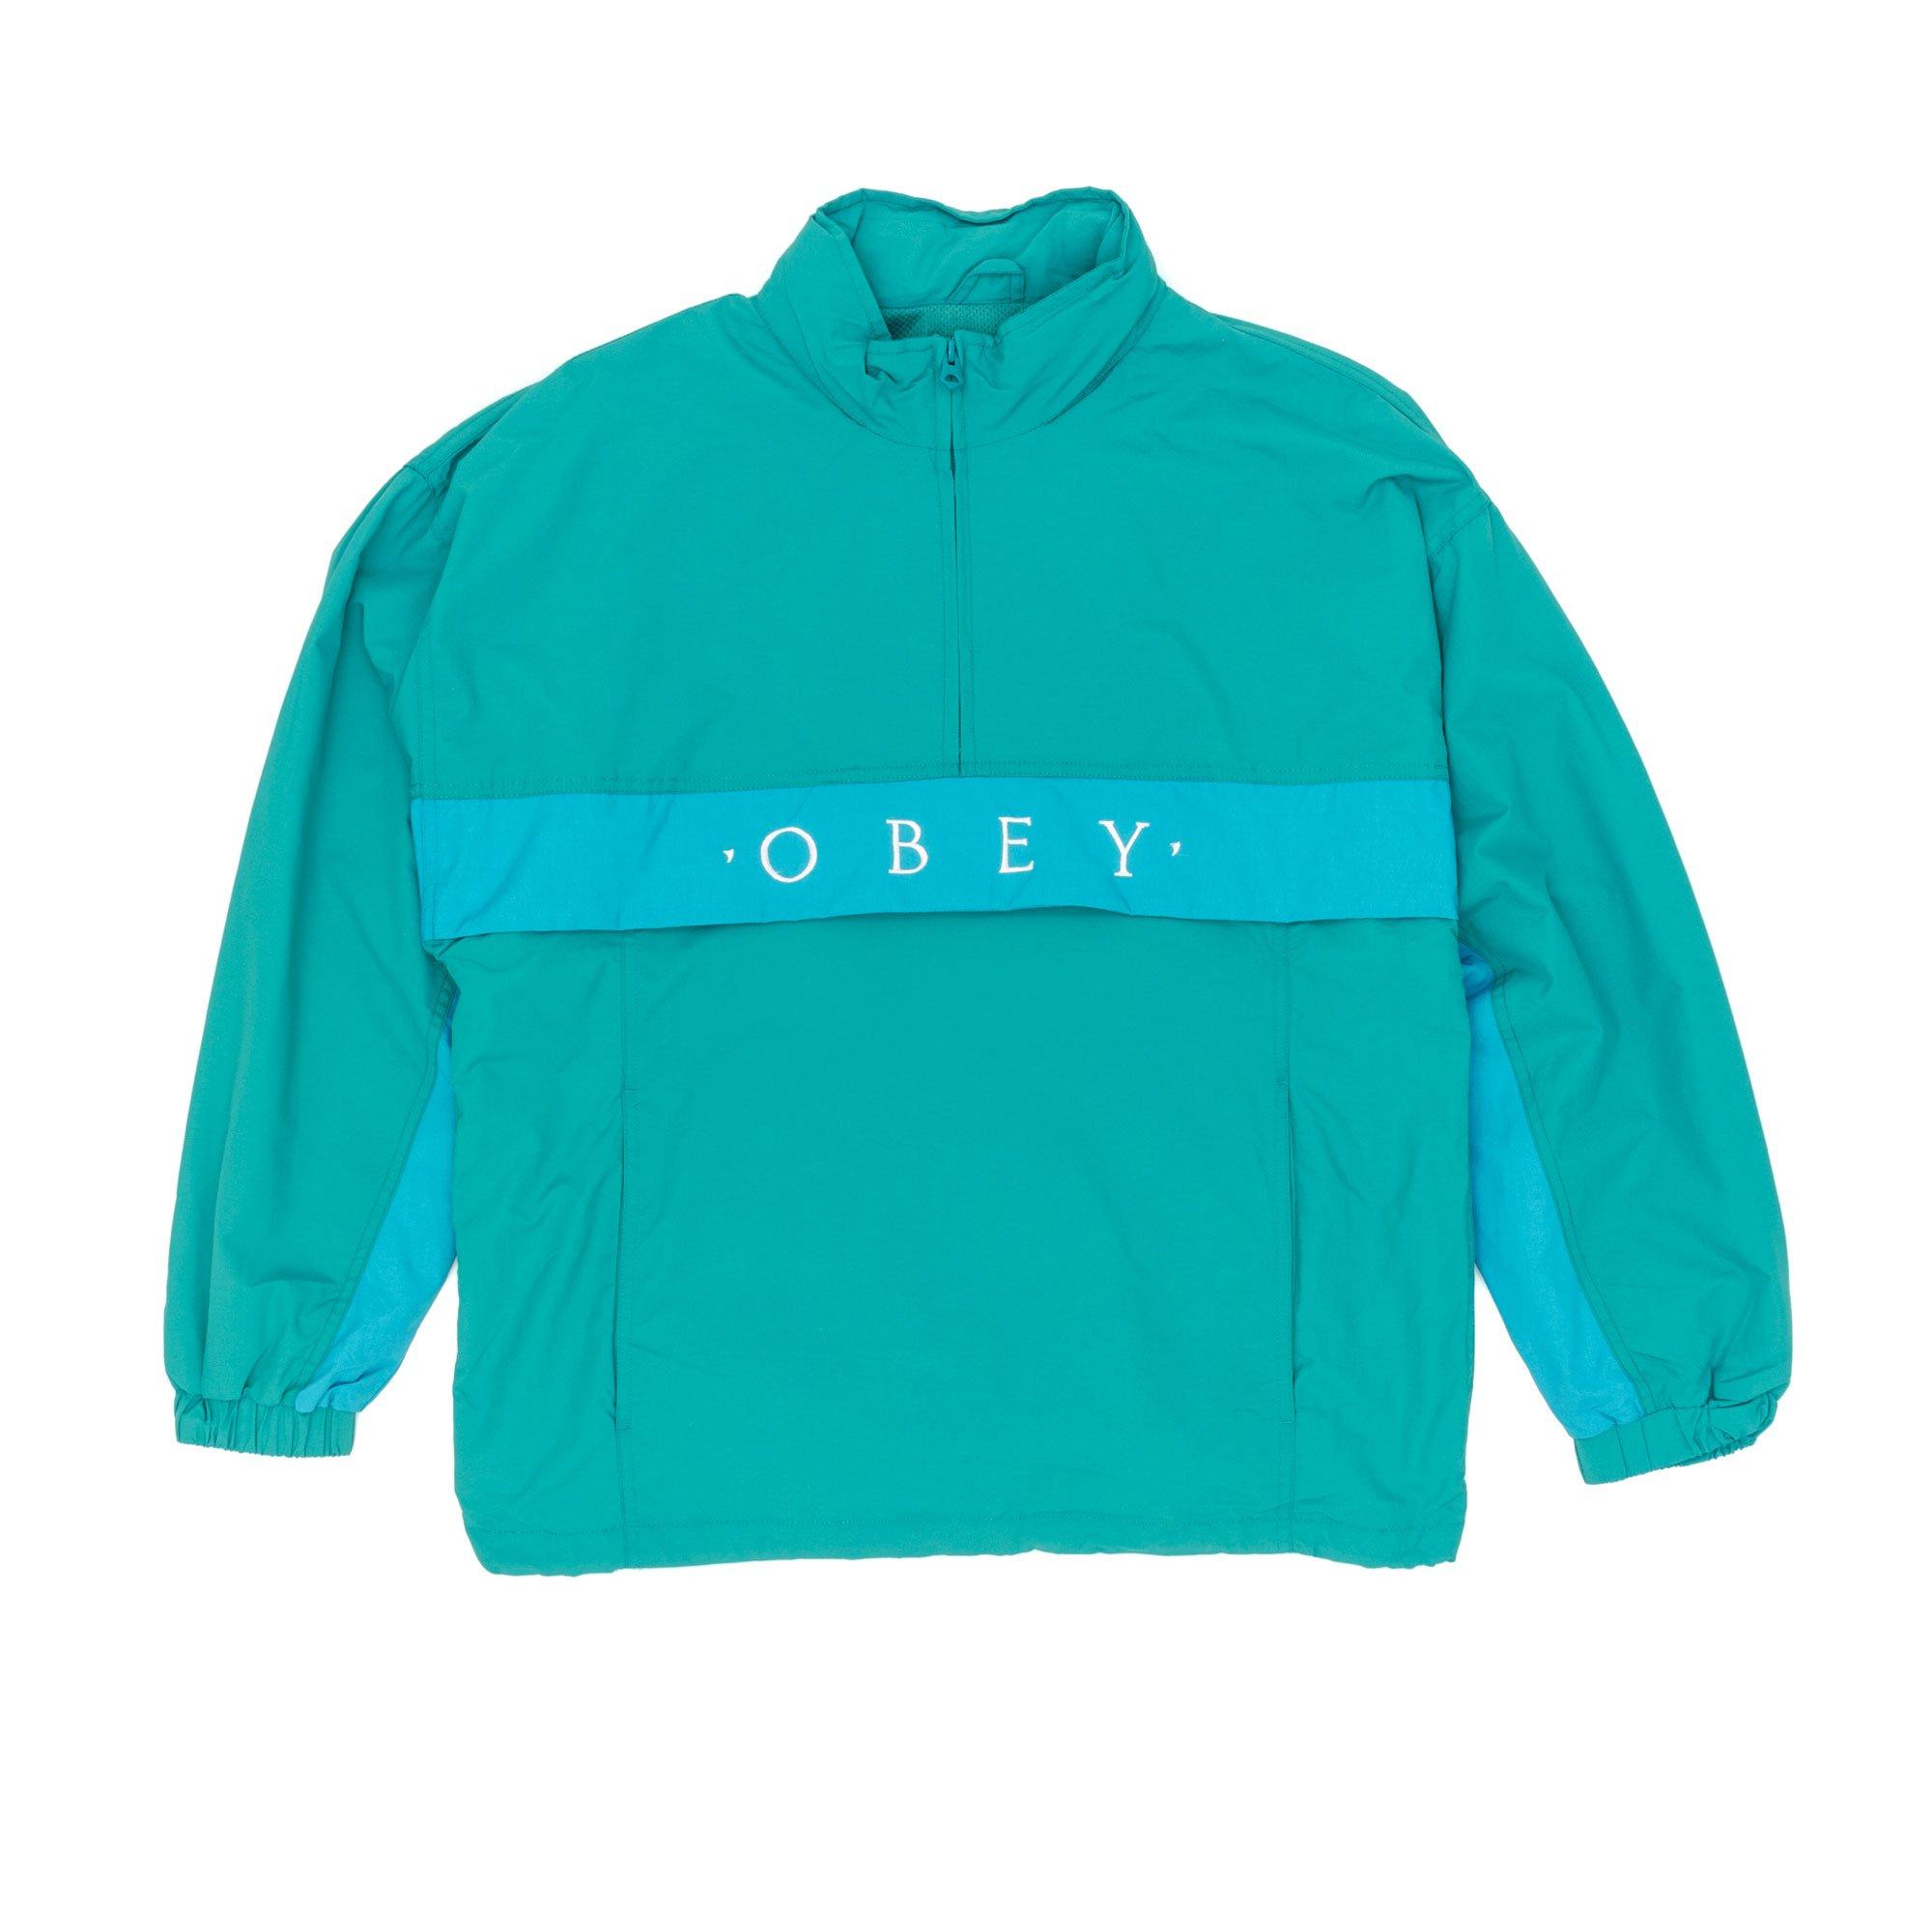 Download Obey Synthetic Title Anorak Jacket in Green for Men - Lyst